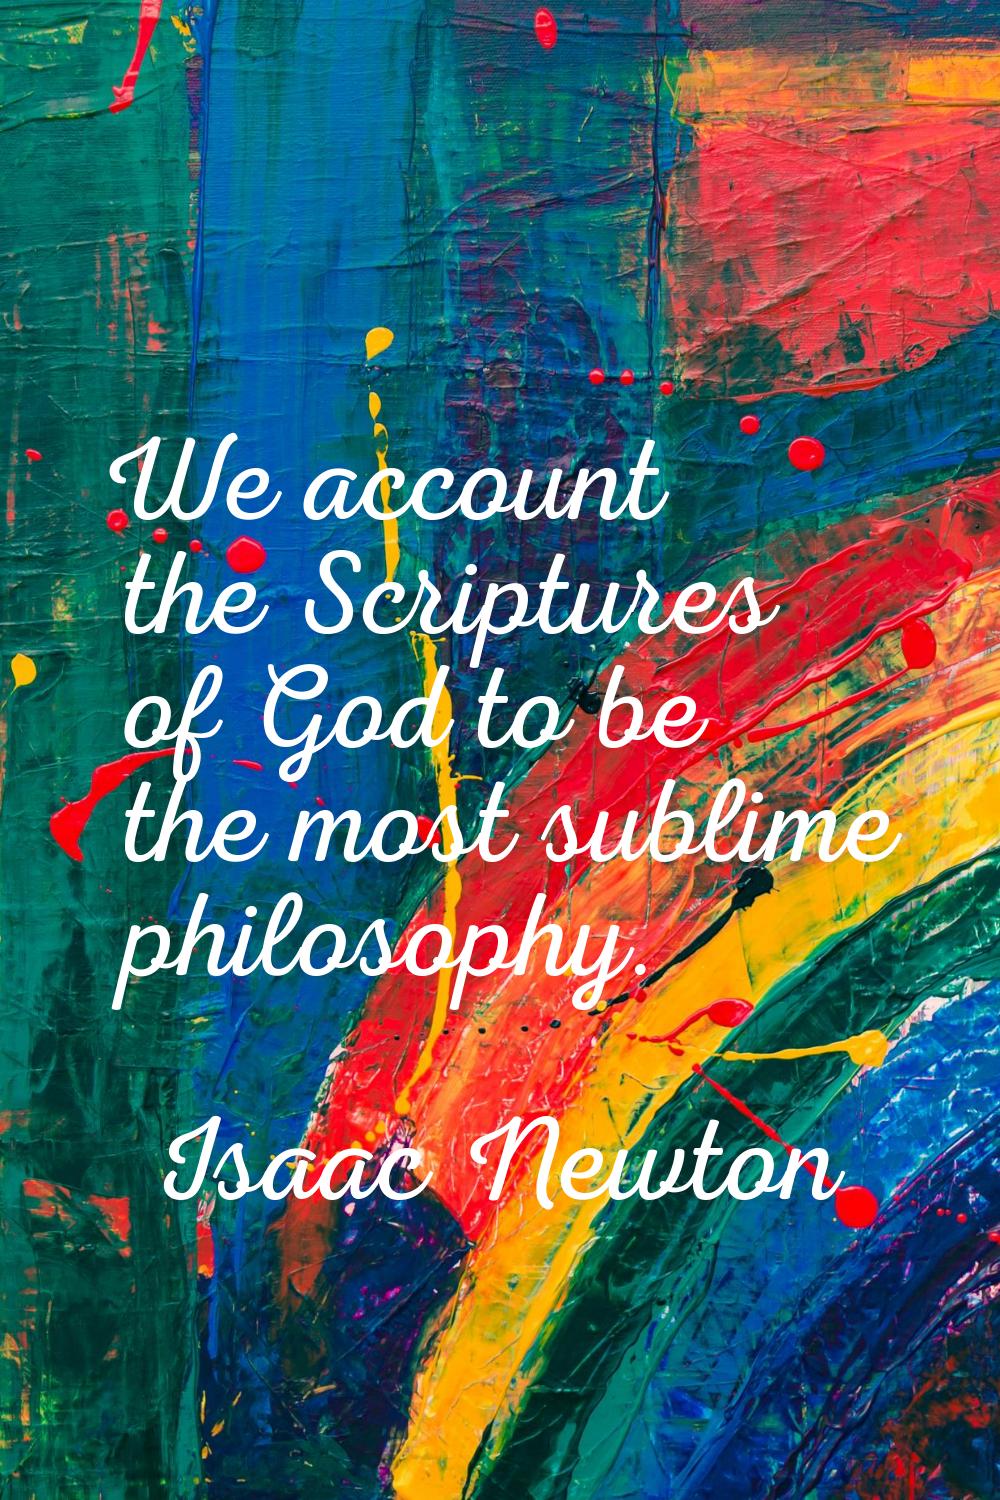 We account the Scriptures of God to be the most sublime philosophy.